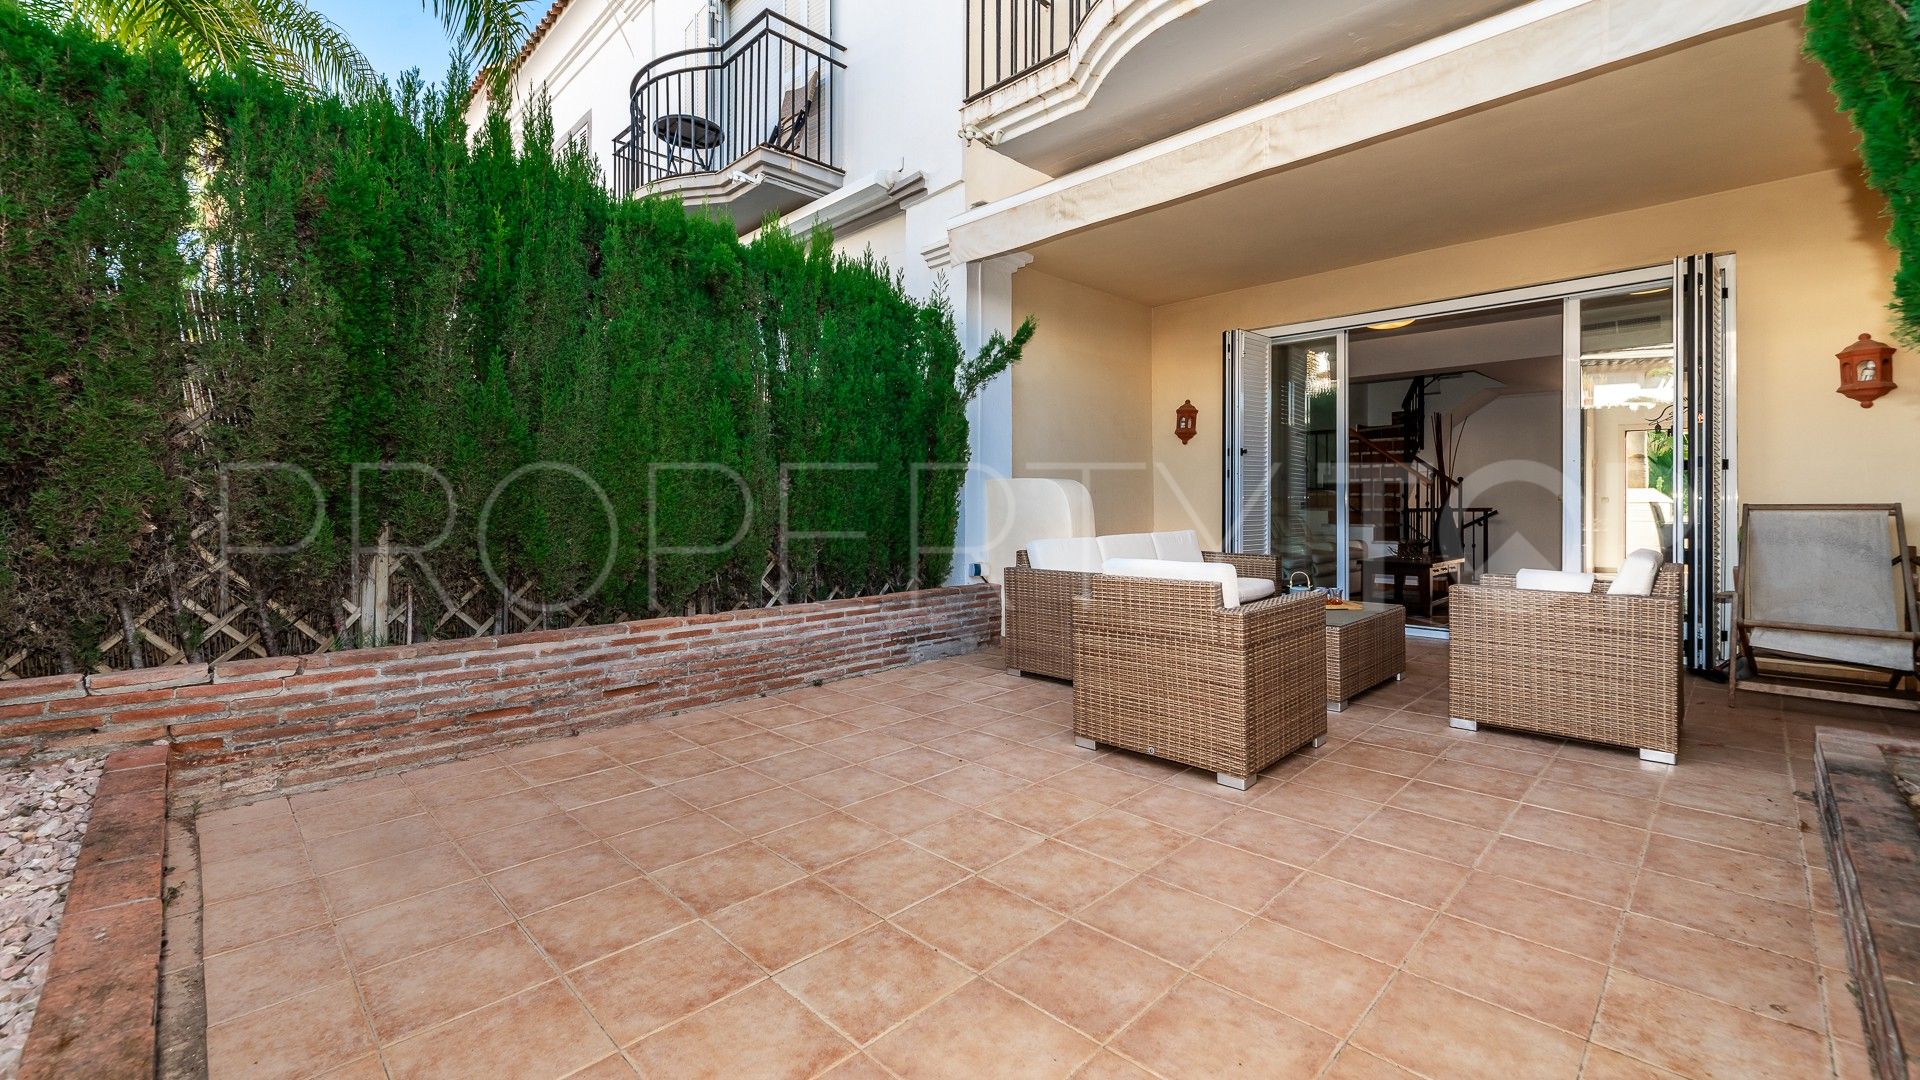 For sale town house in Bahia de Marbella with 3 bedrooms